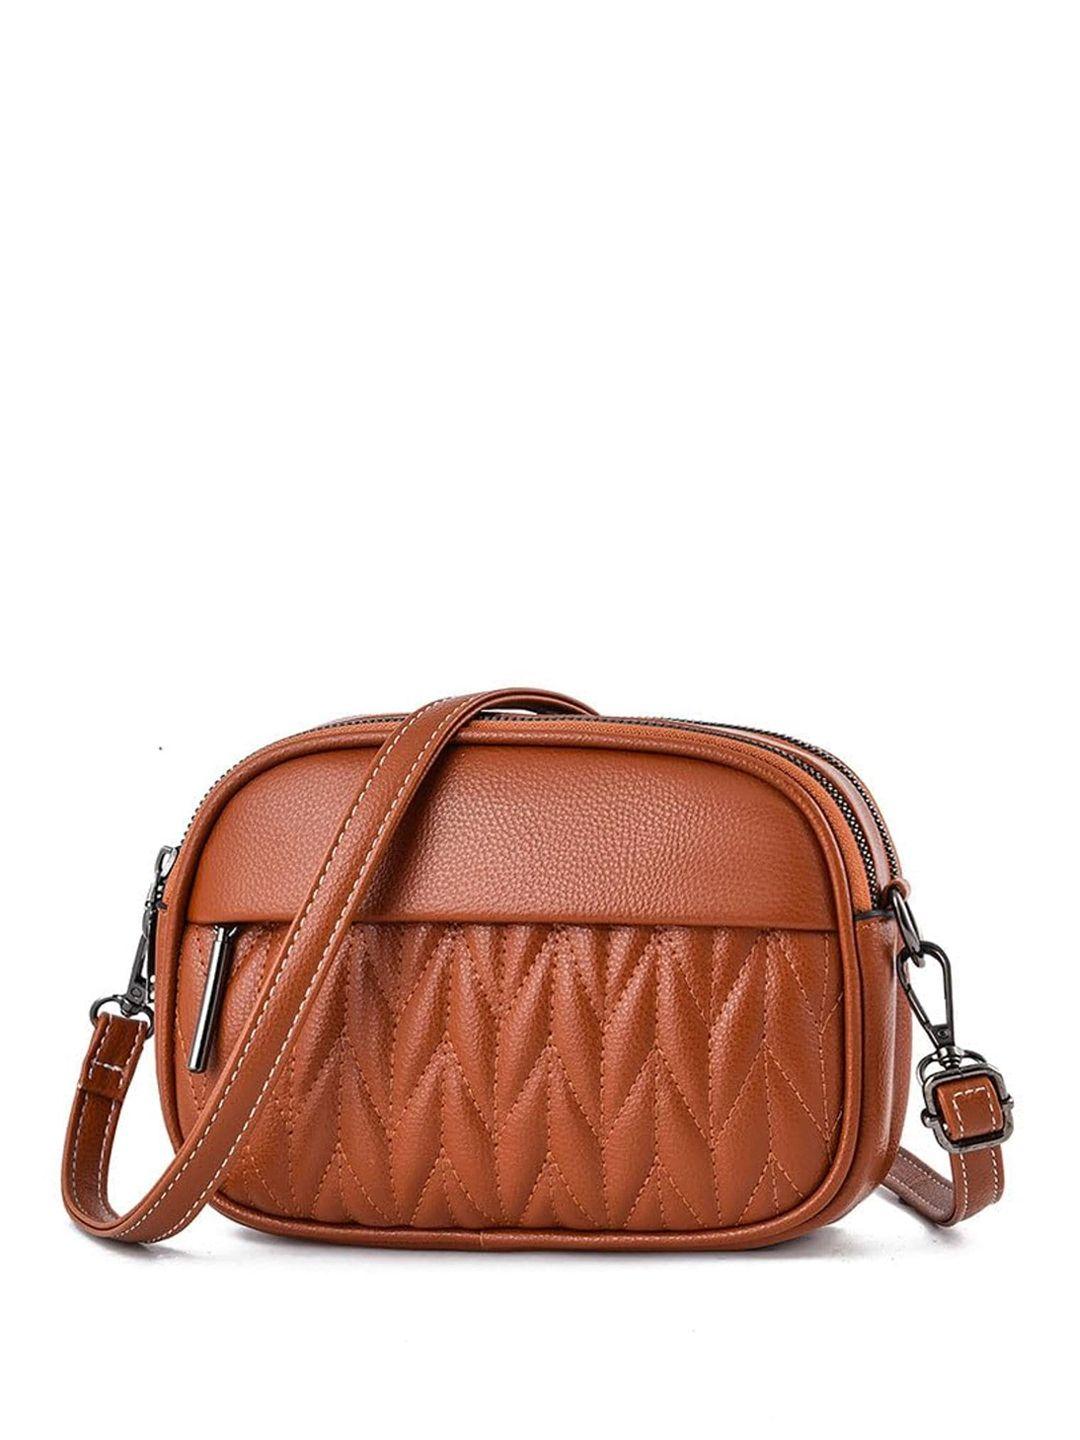 syga textured leather structured sling bag with quilted